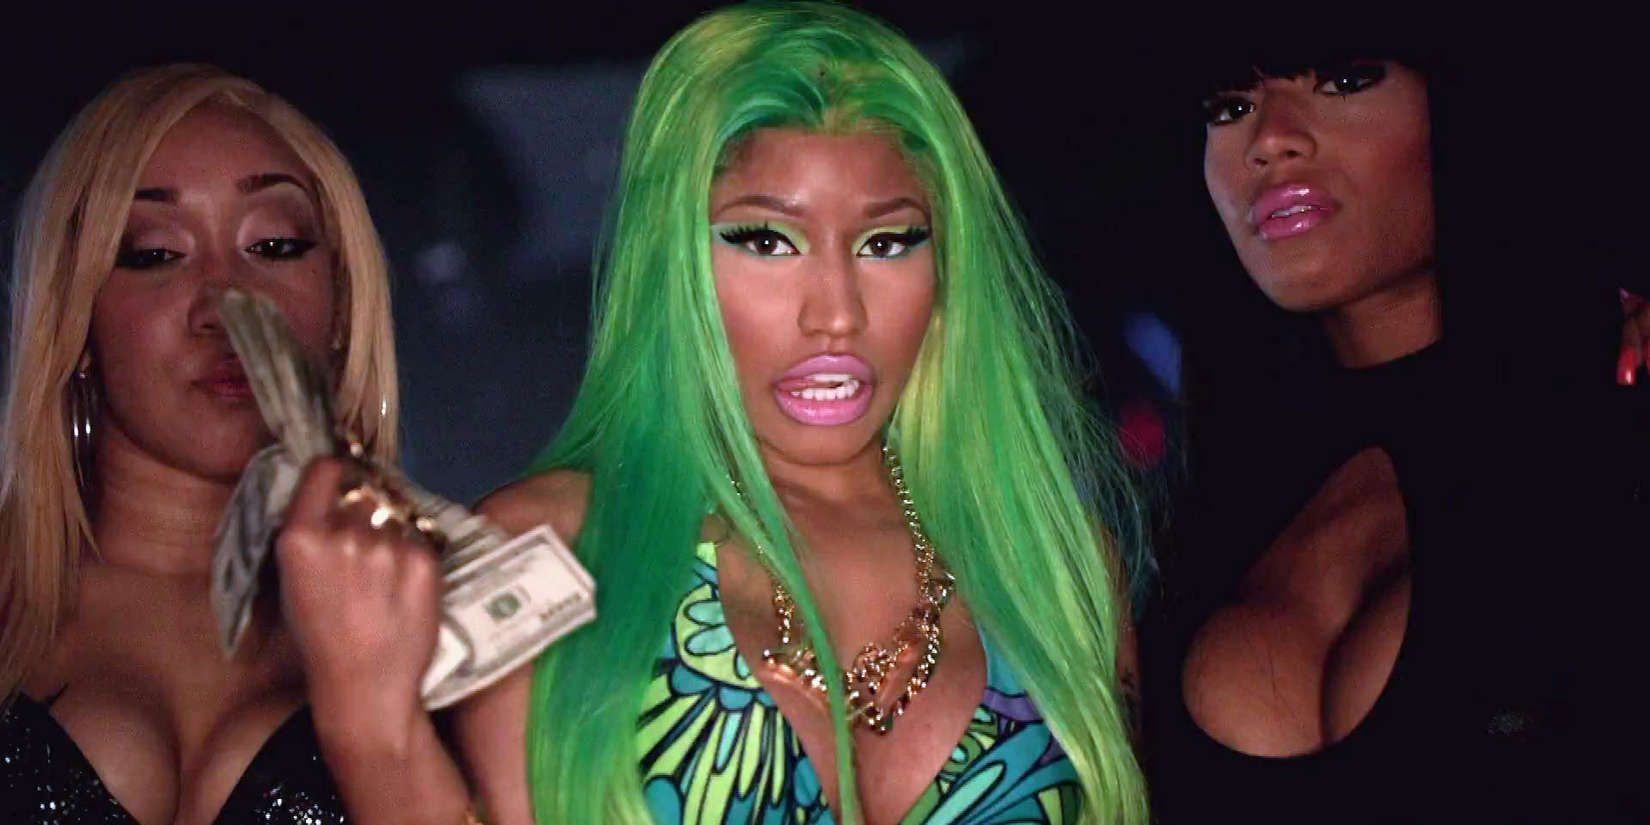 Nicki Minaj wearing a green wig and holding a stack of money surrounded by two girls